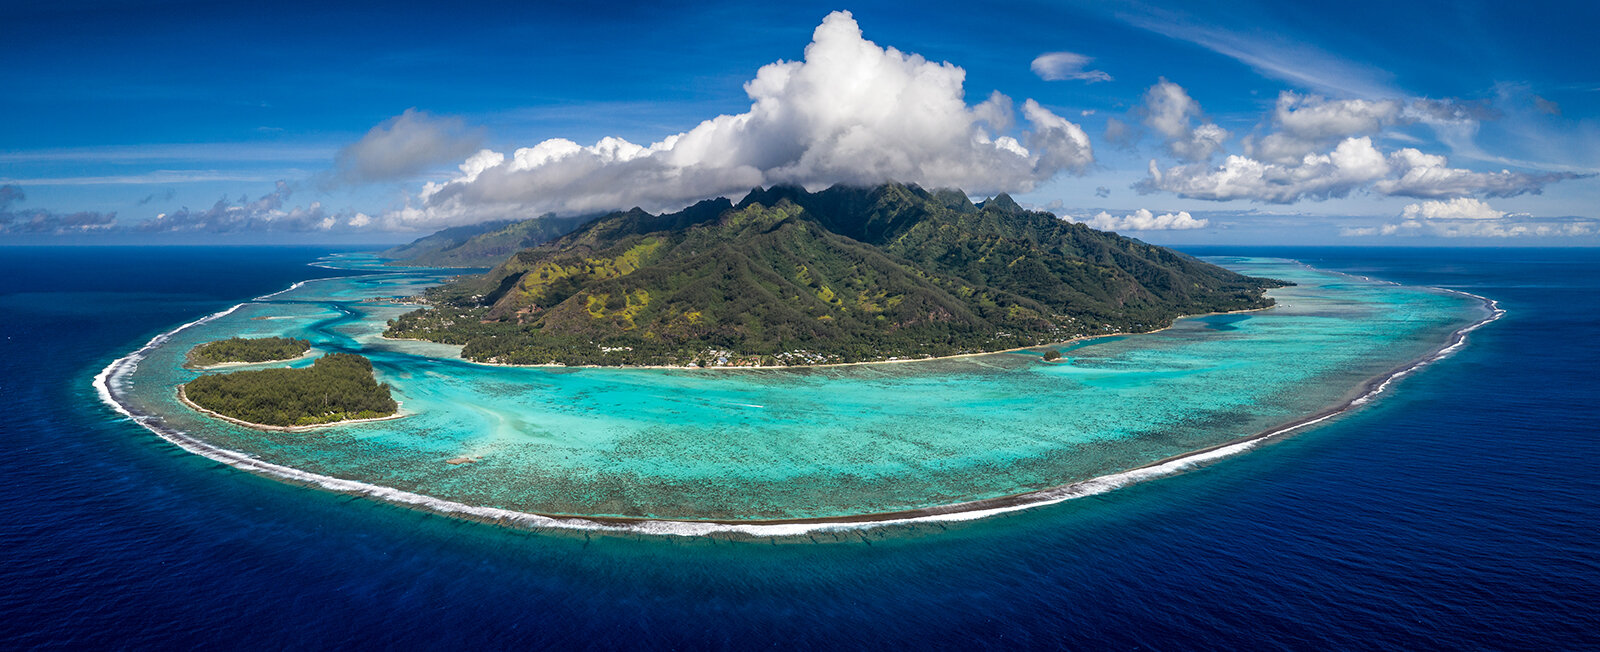 Aerial wide view of the island of Moorea in French Polynesia